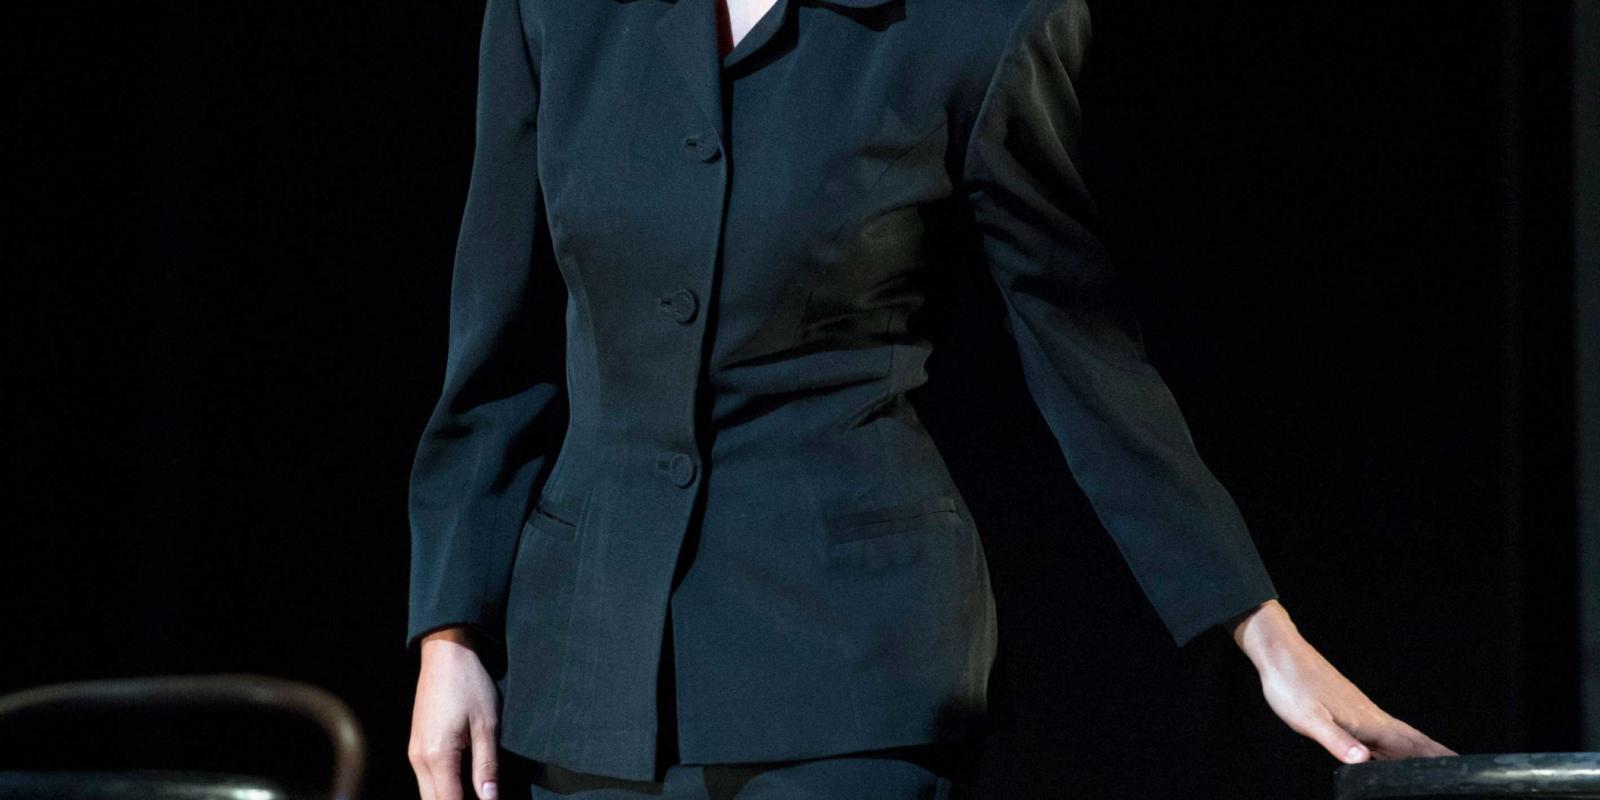 a women in a tailored dark suit